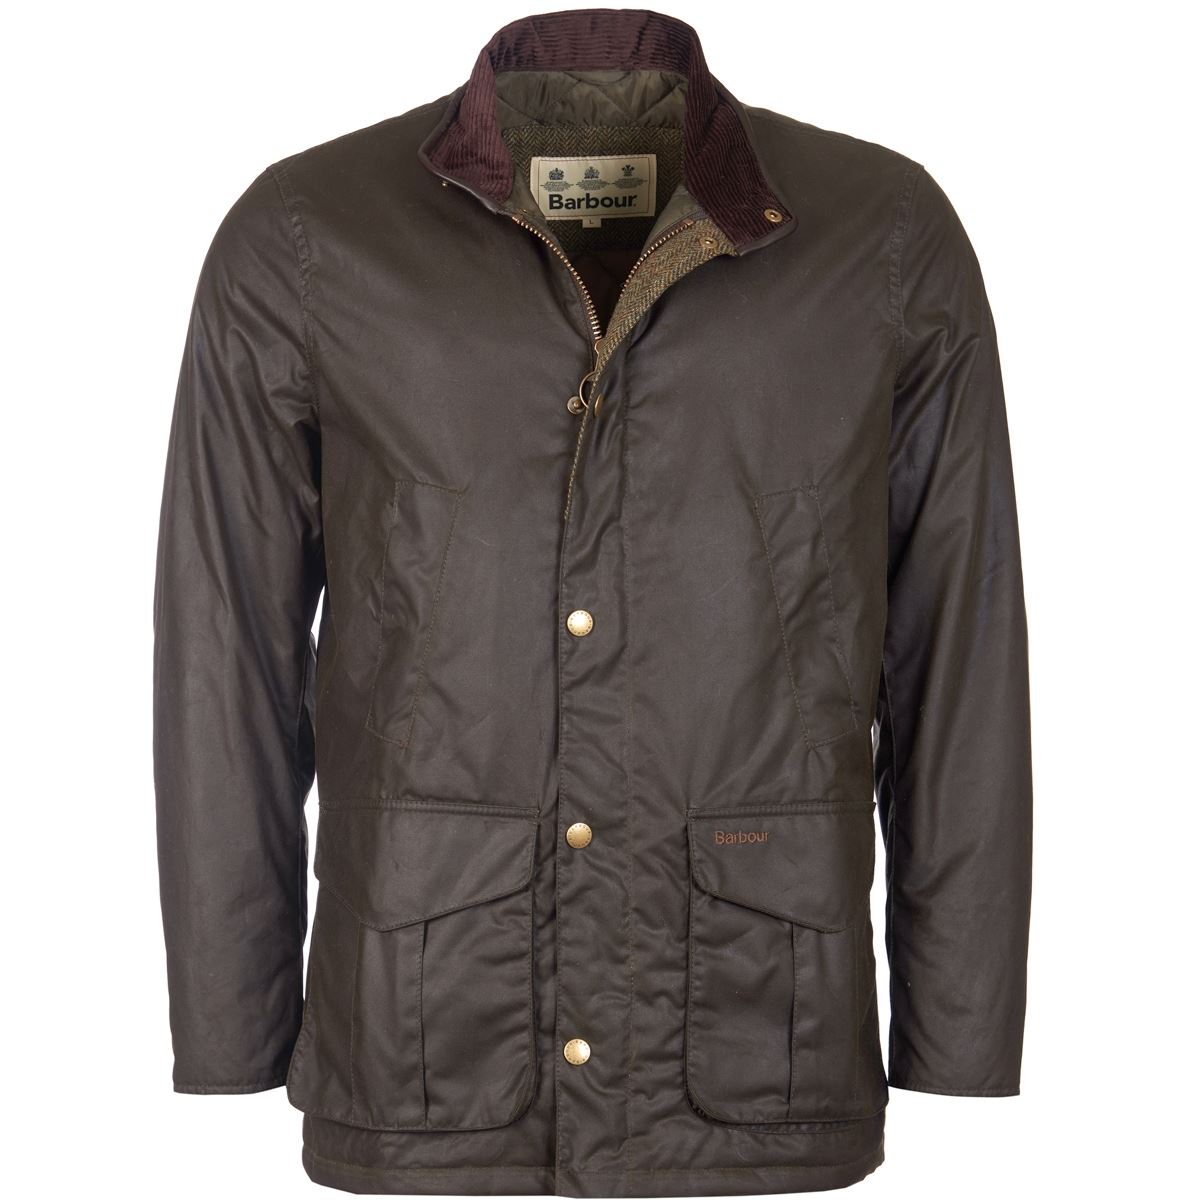 Is the Barbour Hereford Wax Jacket in high demand?